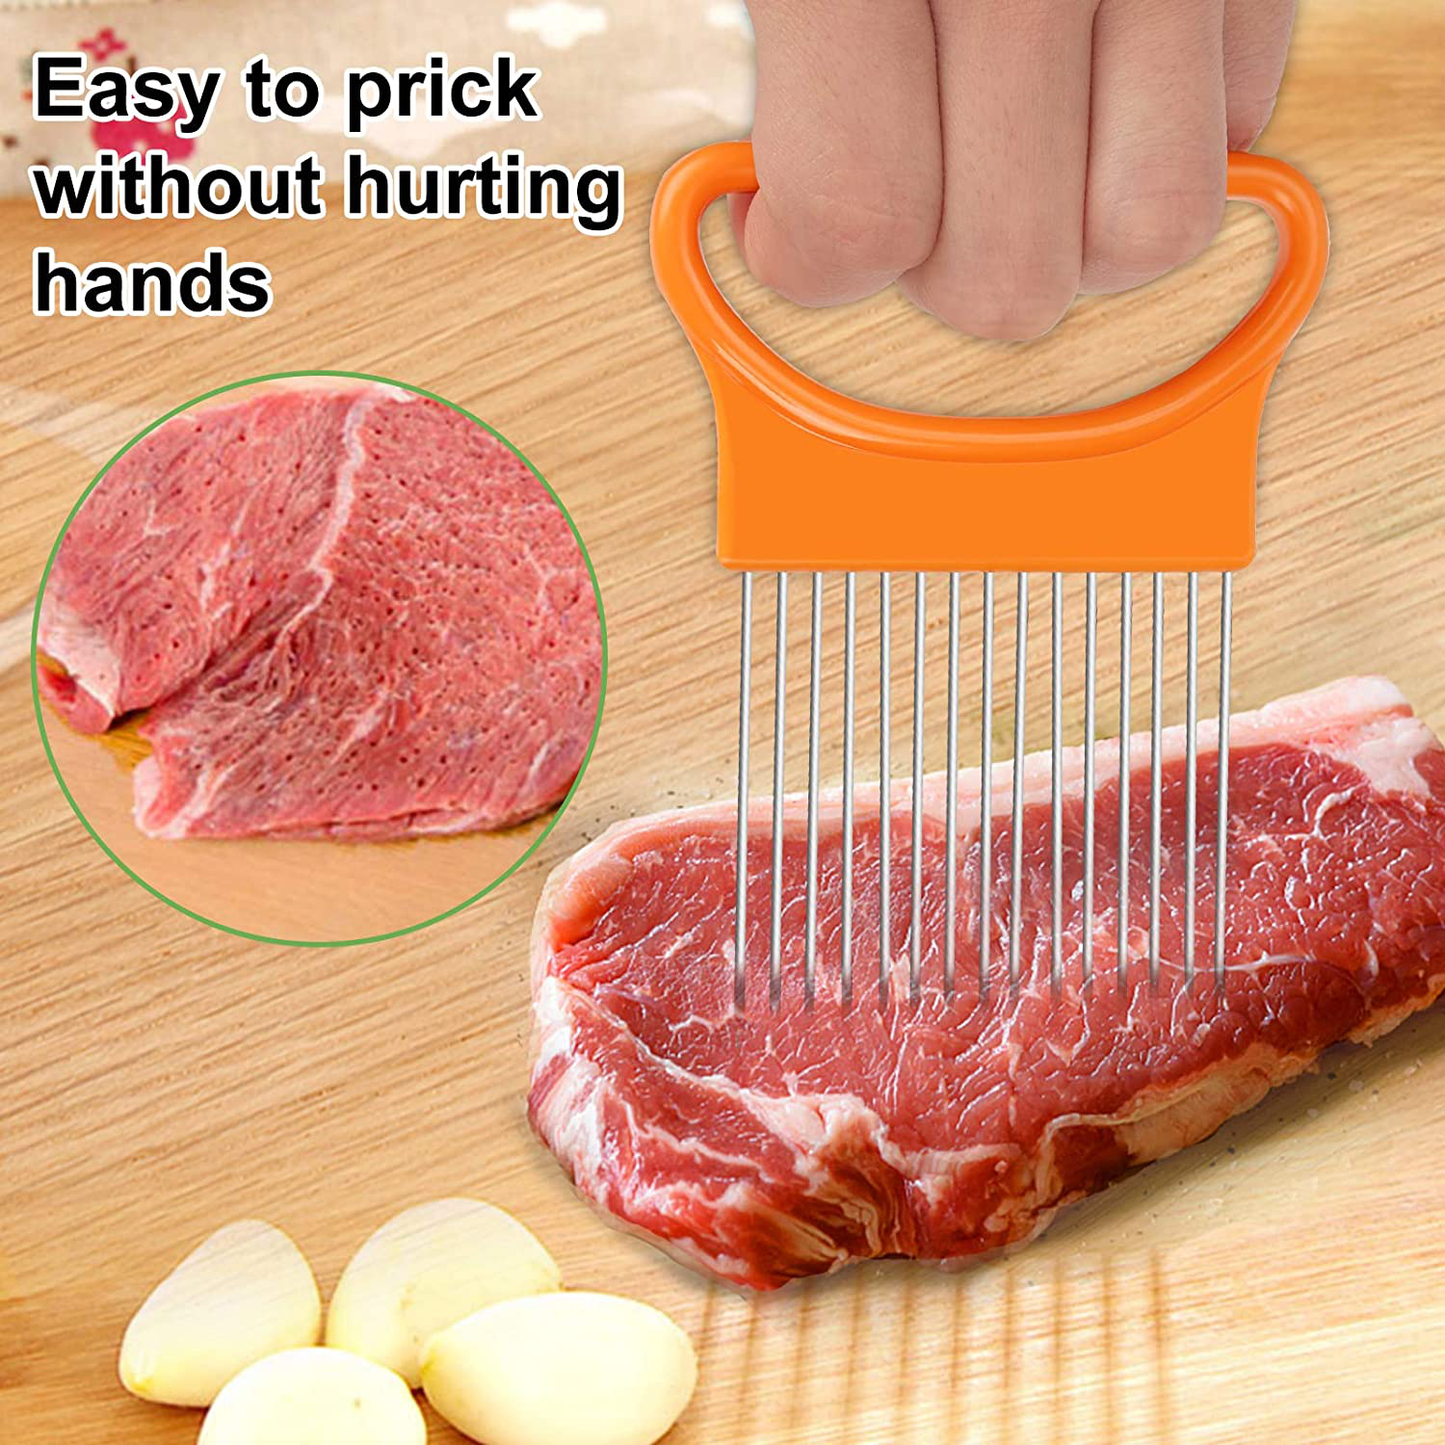 2Pcs Ruooson Onion Holder for Slicing, Stainless Steel Prongs Kitchen Slicer, Lemon Cucumber Cutter Comb,Meat Tenderizer,Green and Orange (Orange)